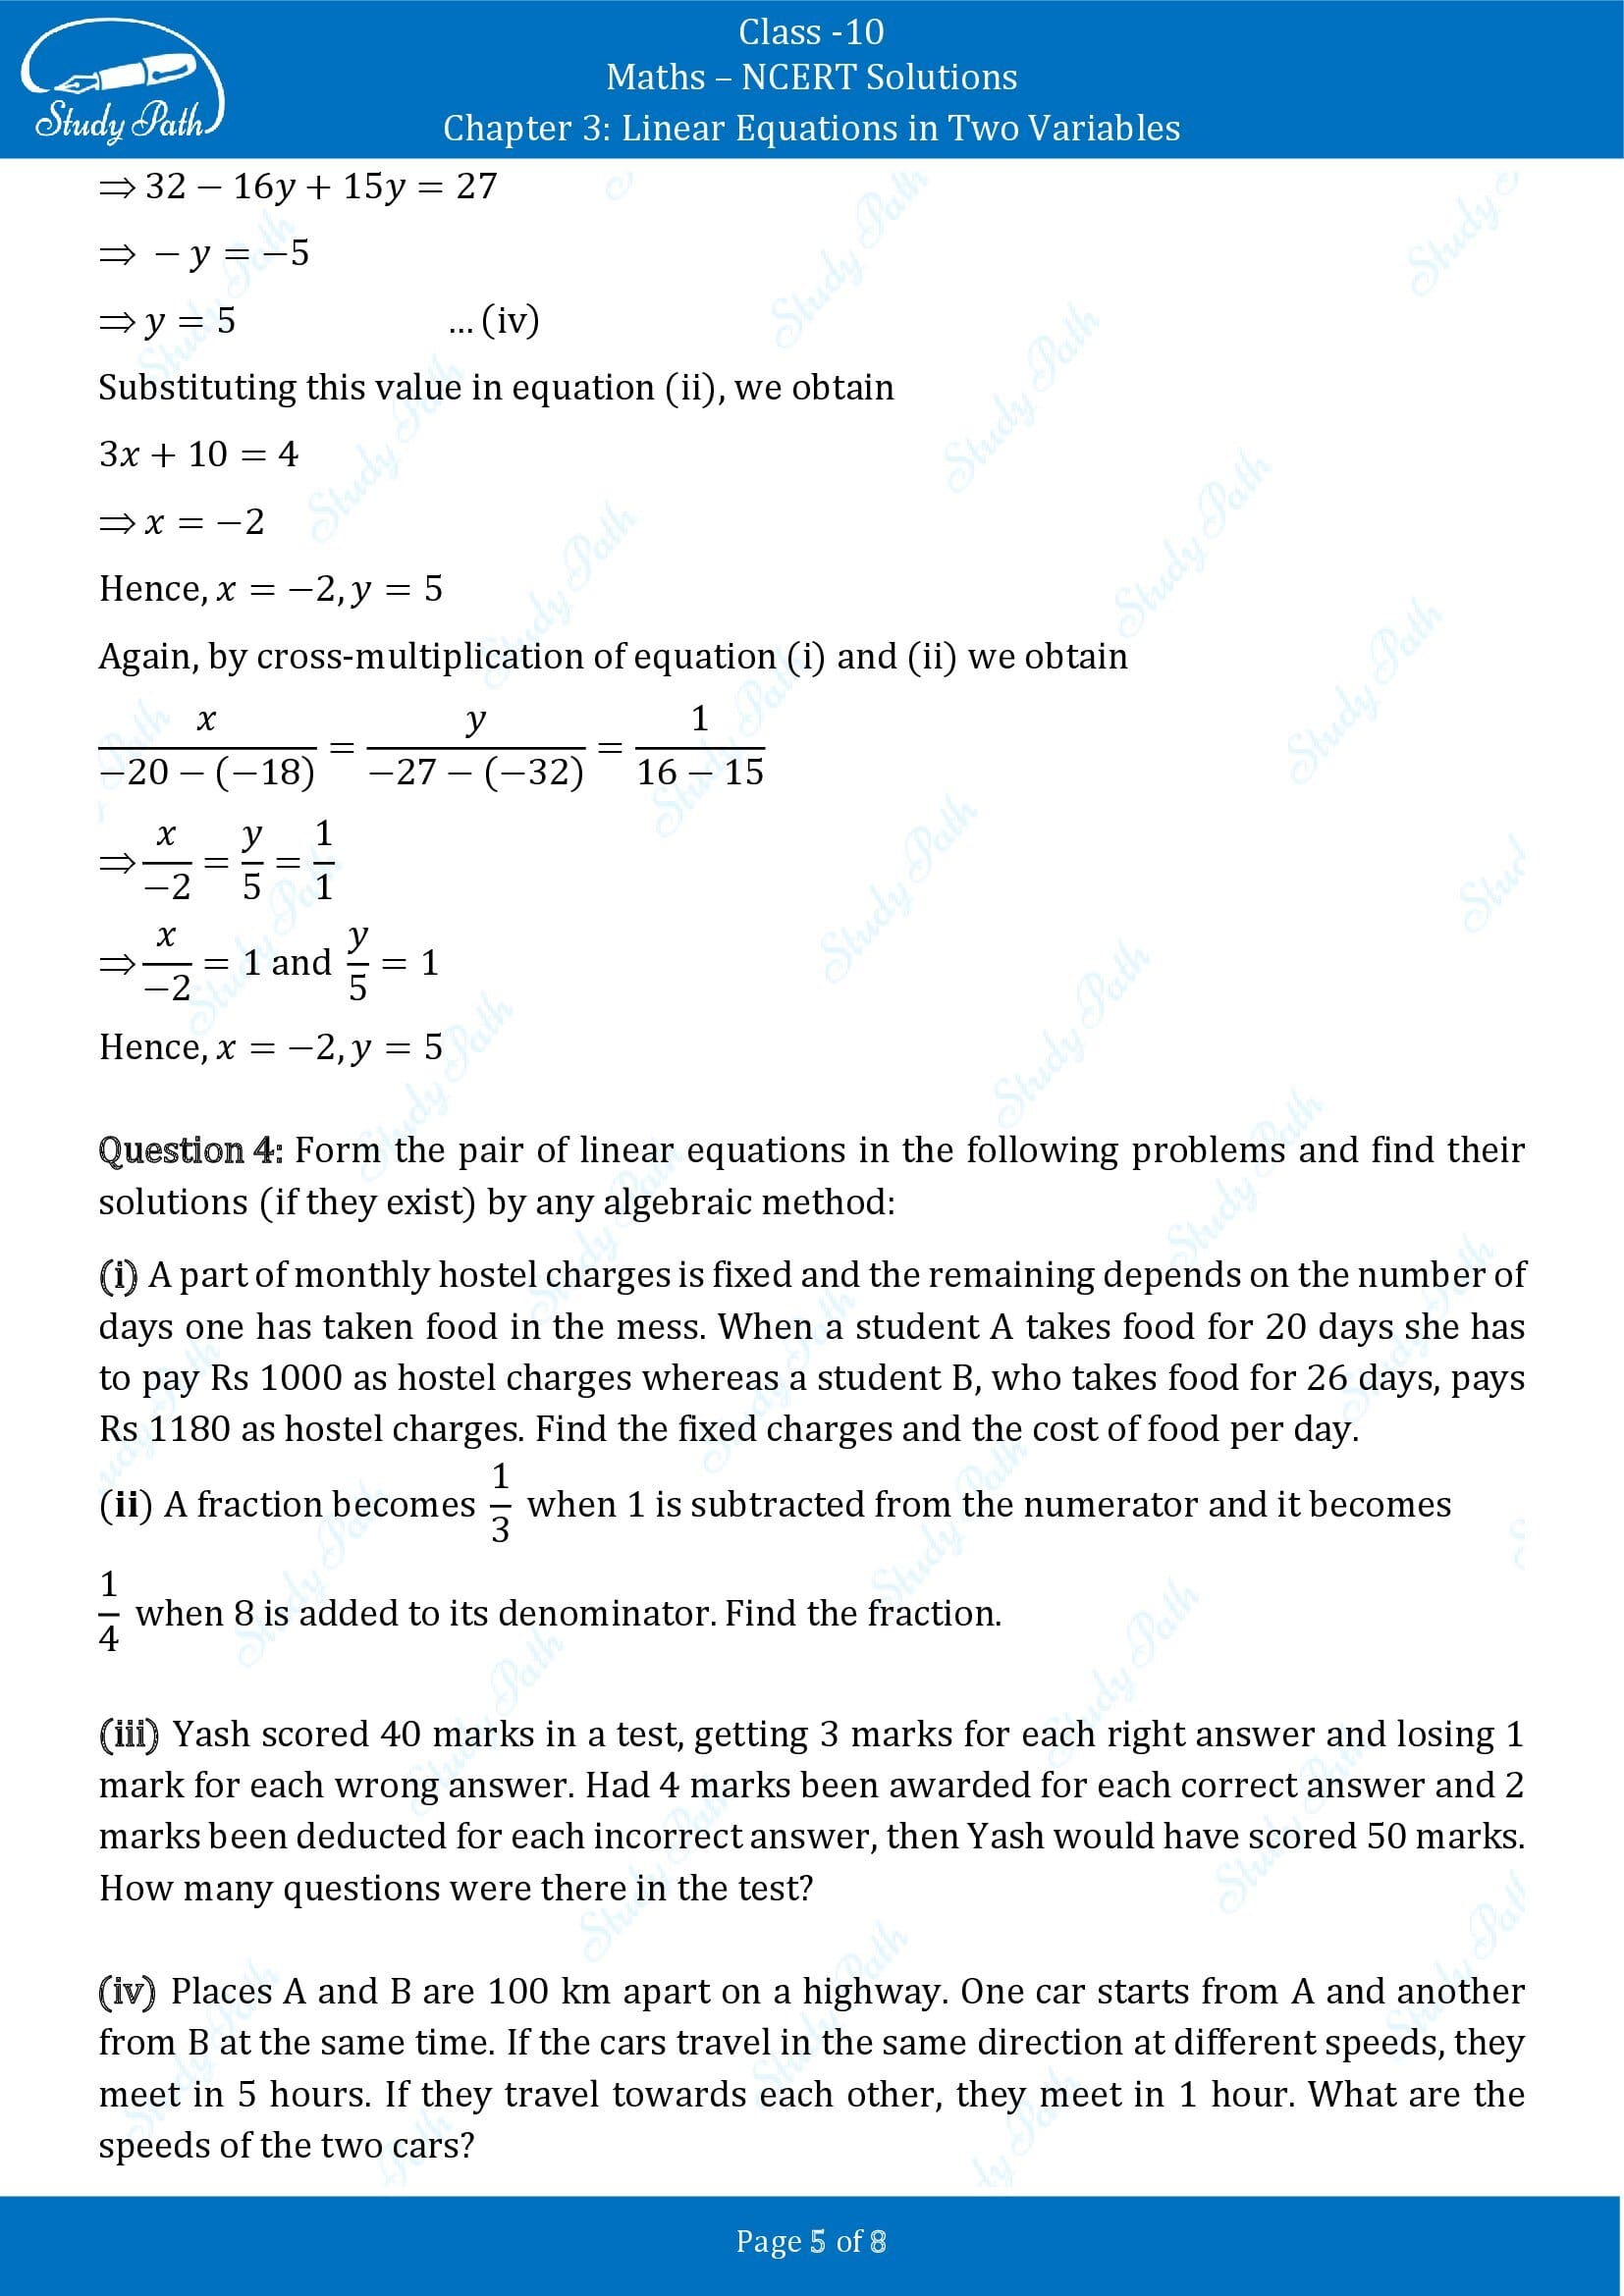 NCERT Solutions for Class 10 Maths Chapter 3 Linear Equations in Two Variables Exercise 3.5 00005